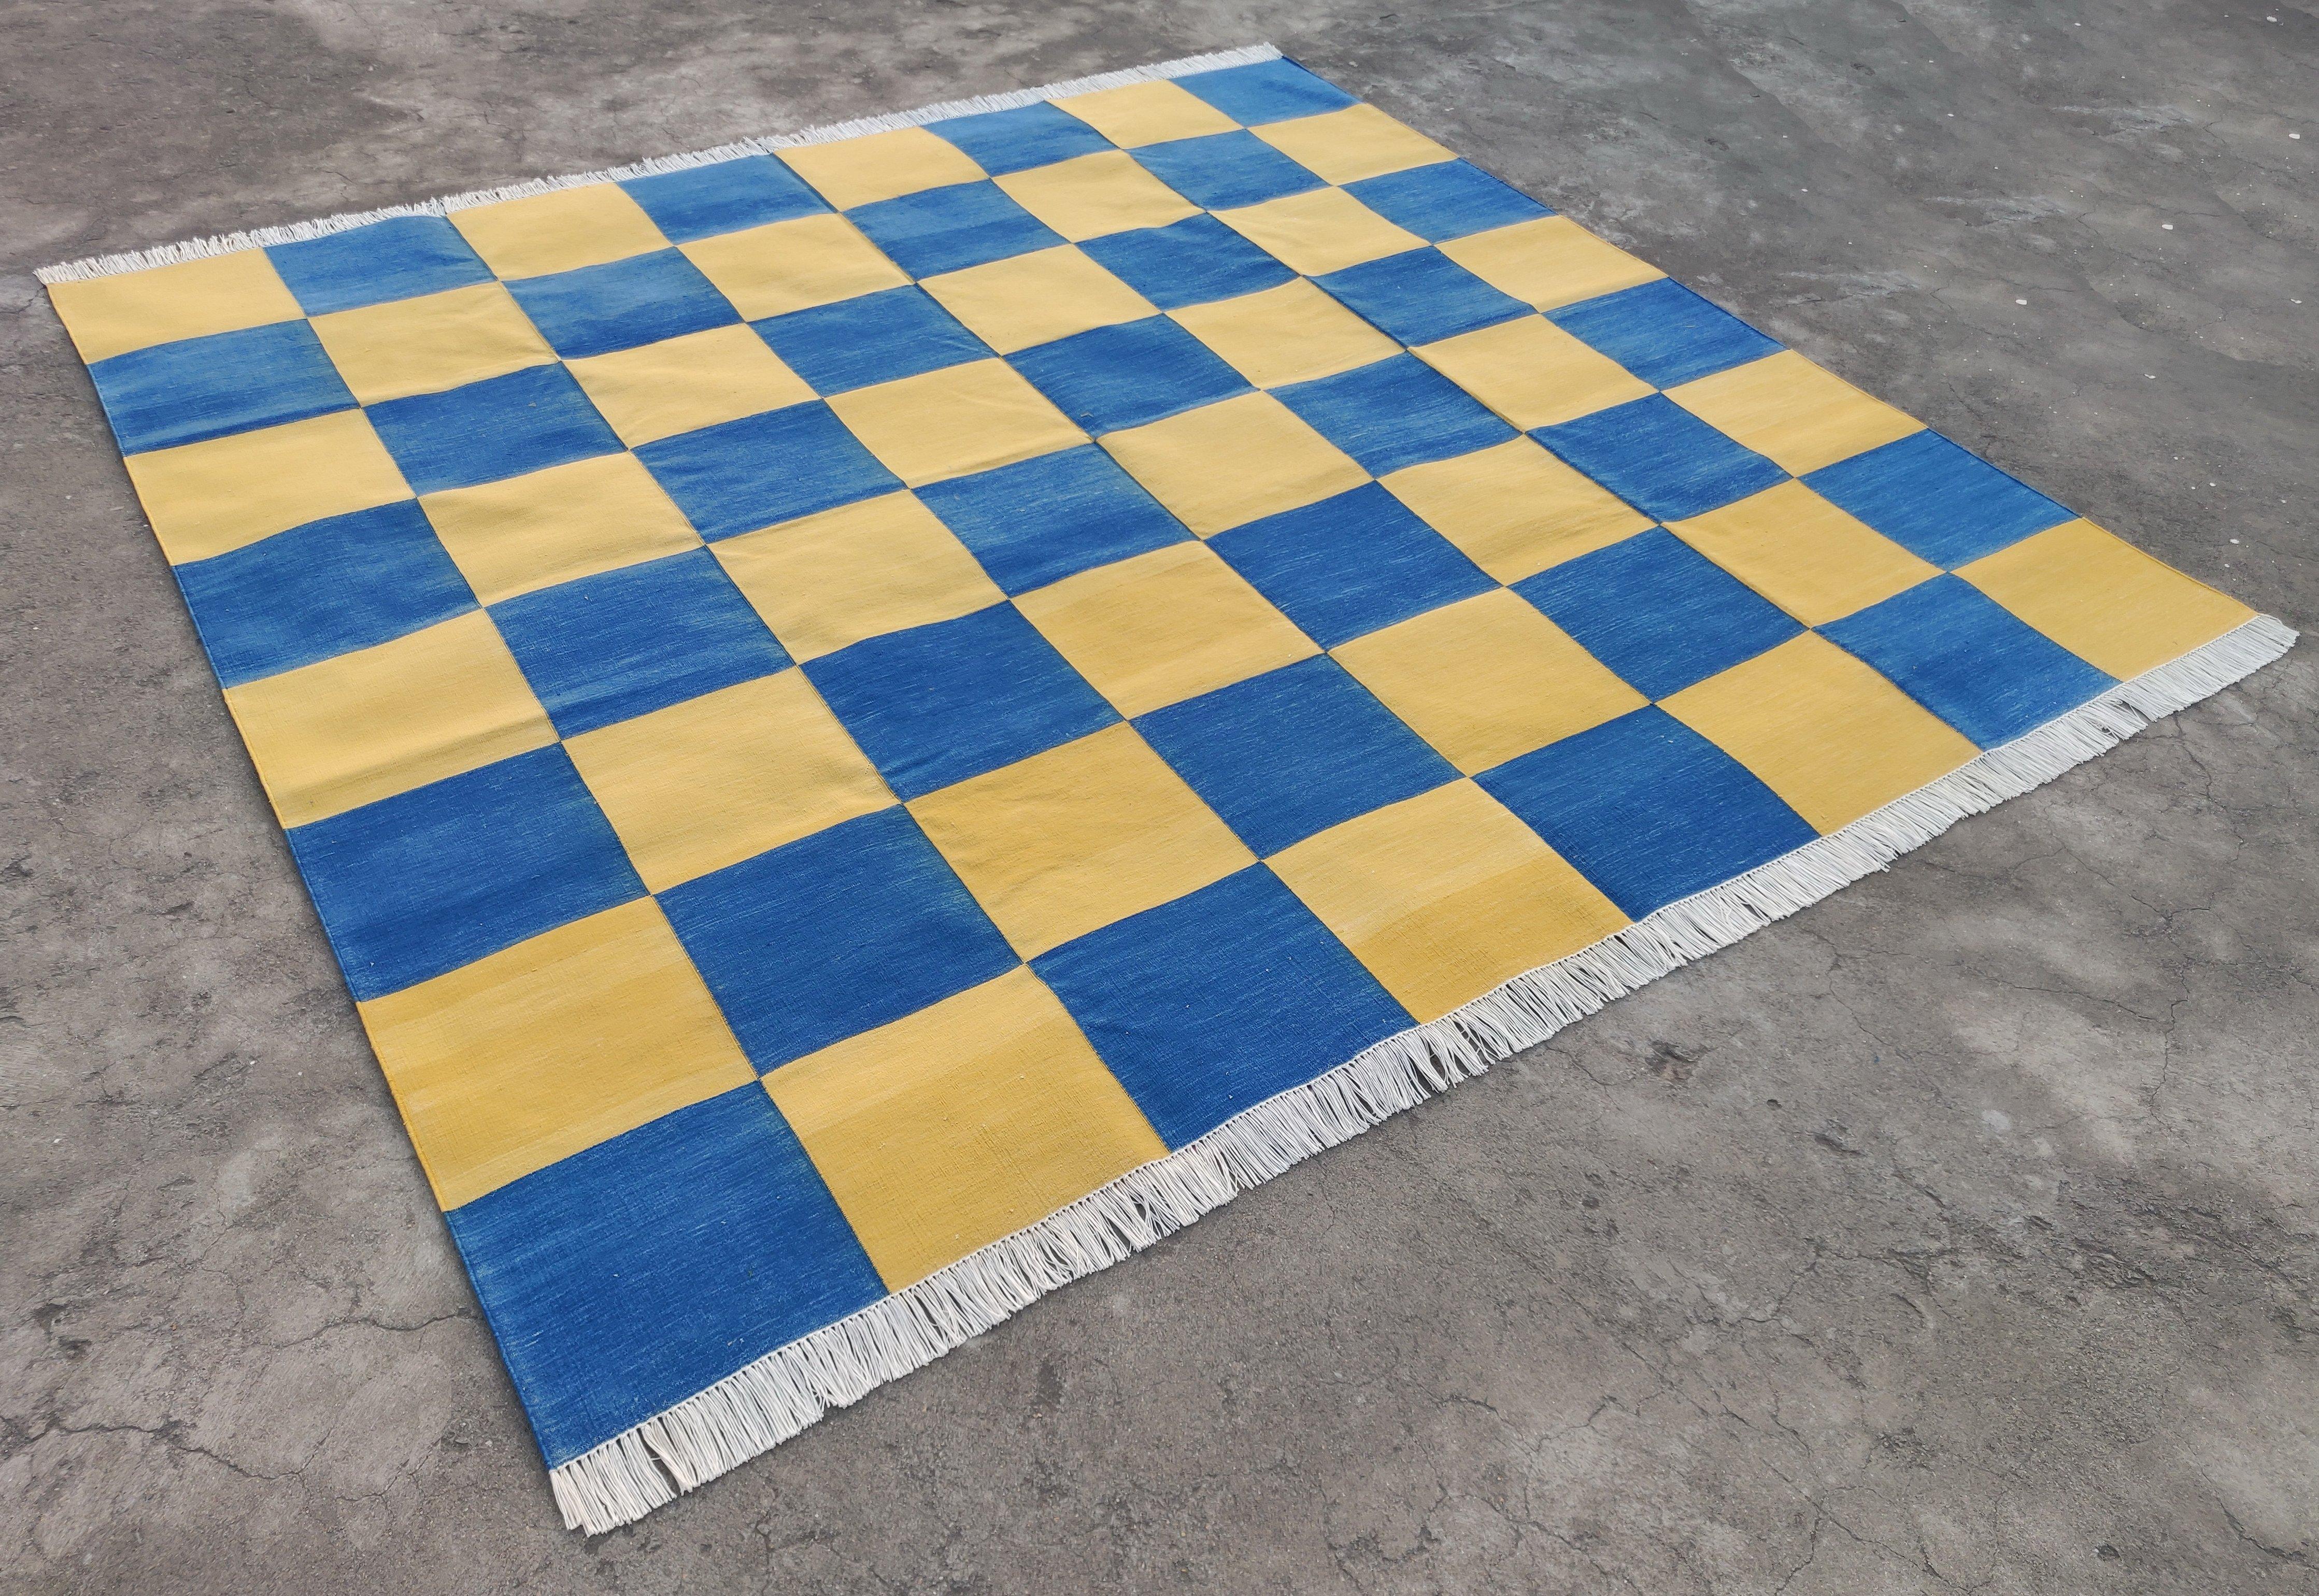 Cotton Vegetable Dyed Reversible Indigo Blue And Yellow Indian Tile Checked Rug - 8'x10'
These special flat-weave dhurries are hand-woven with 15 ply 100% cotton yarn. Due to the special manufacturing techniques used to create our rugs, the size and